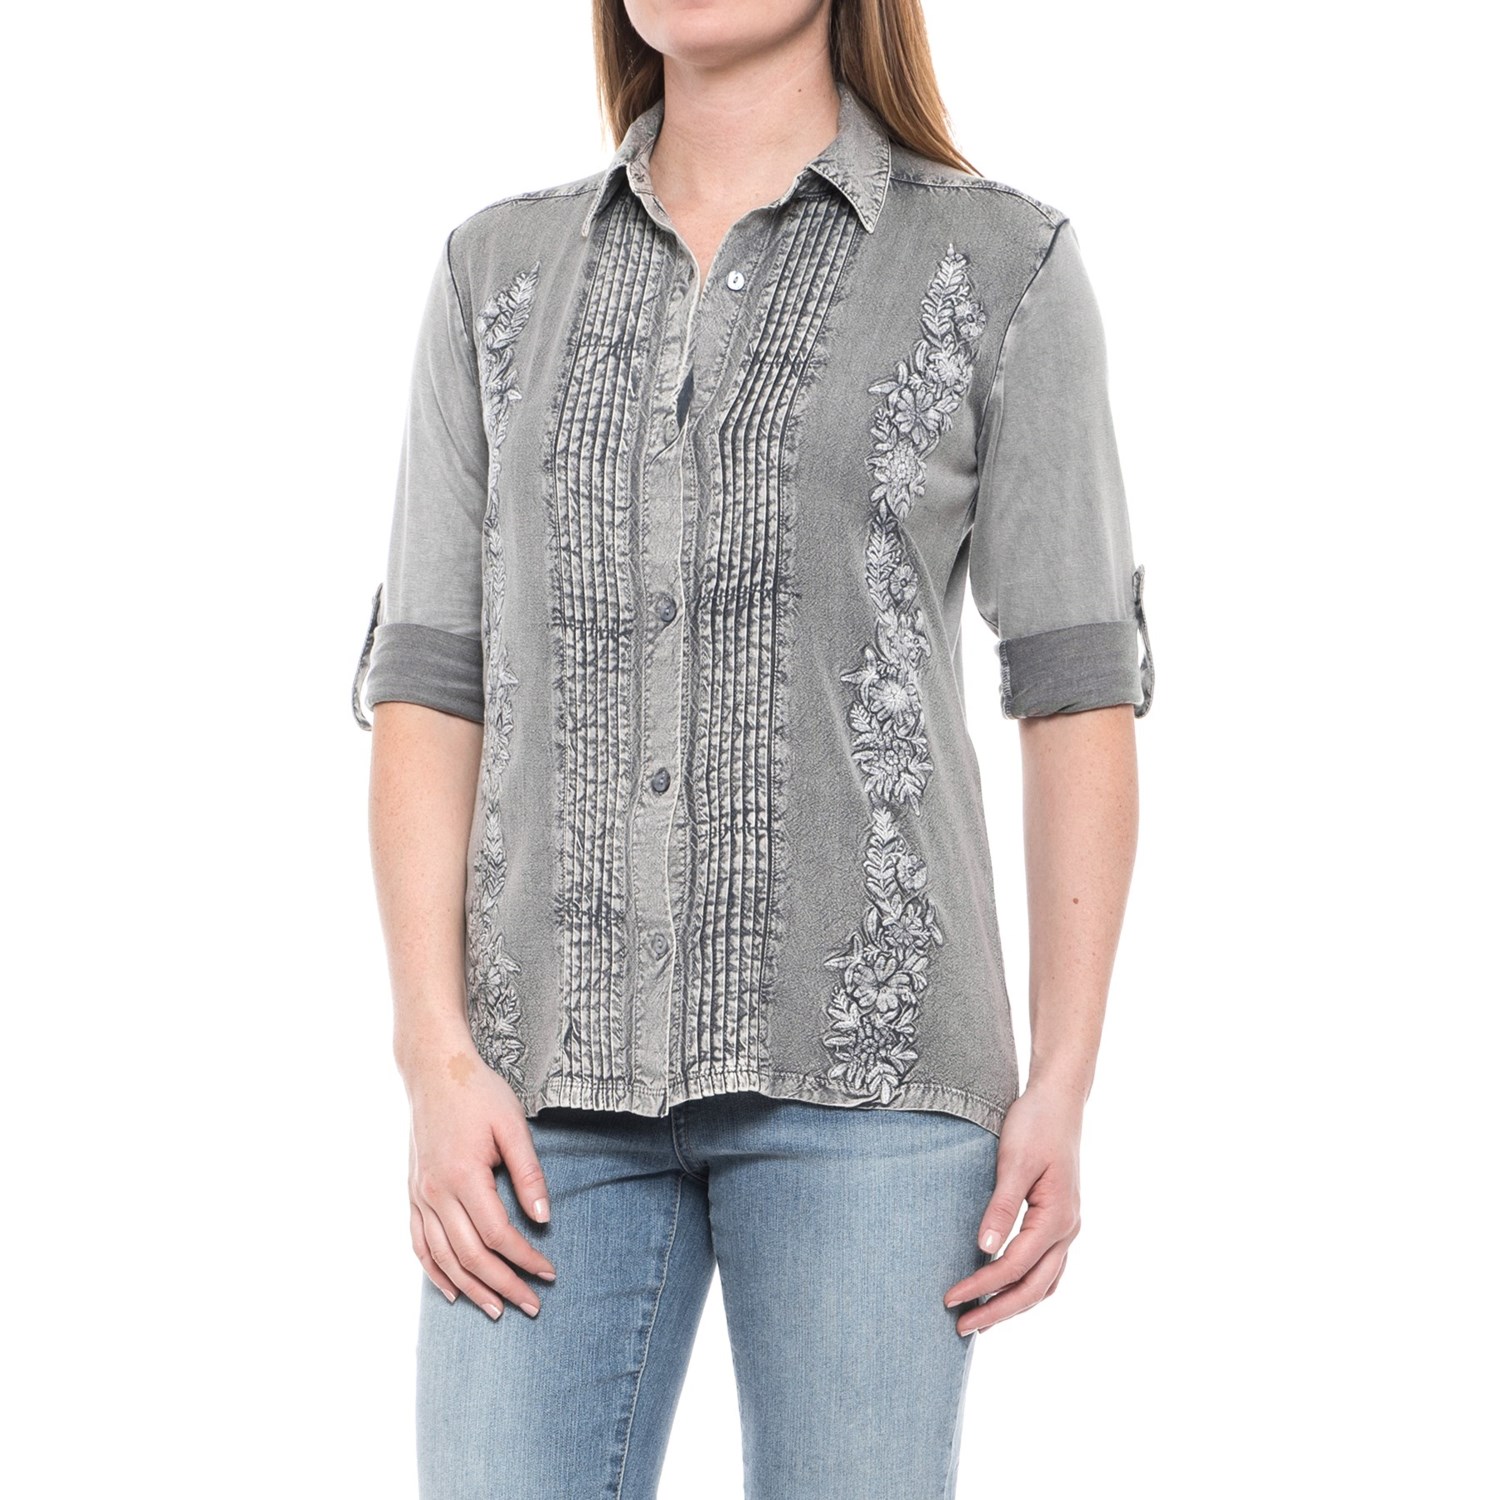 Solitaire Embroidered Button-Up Shirt (For Women) - Save 59%